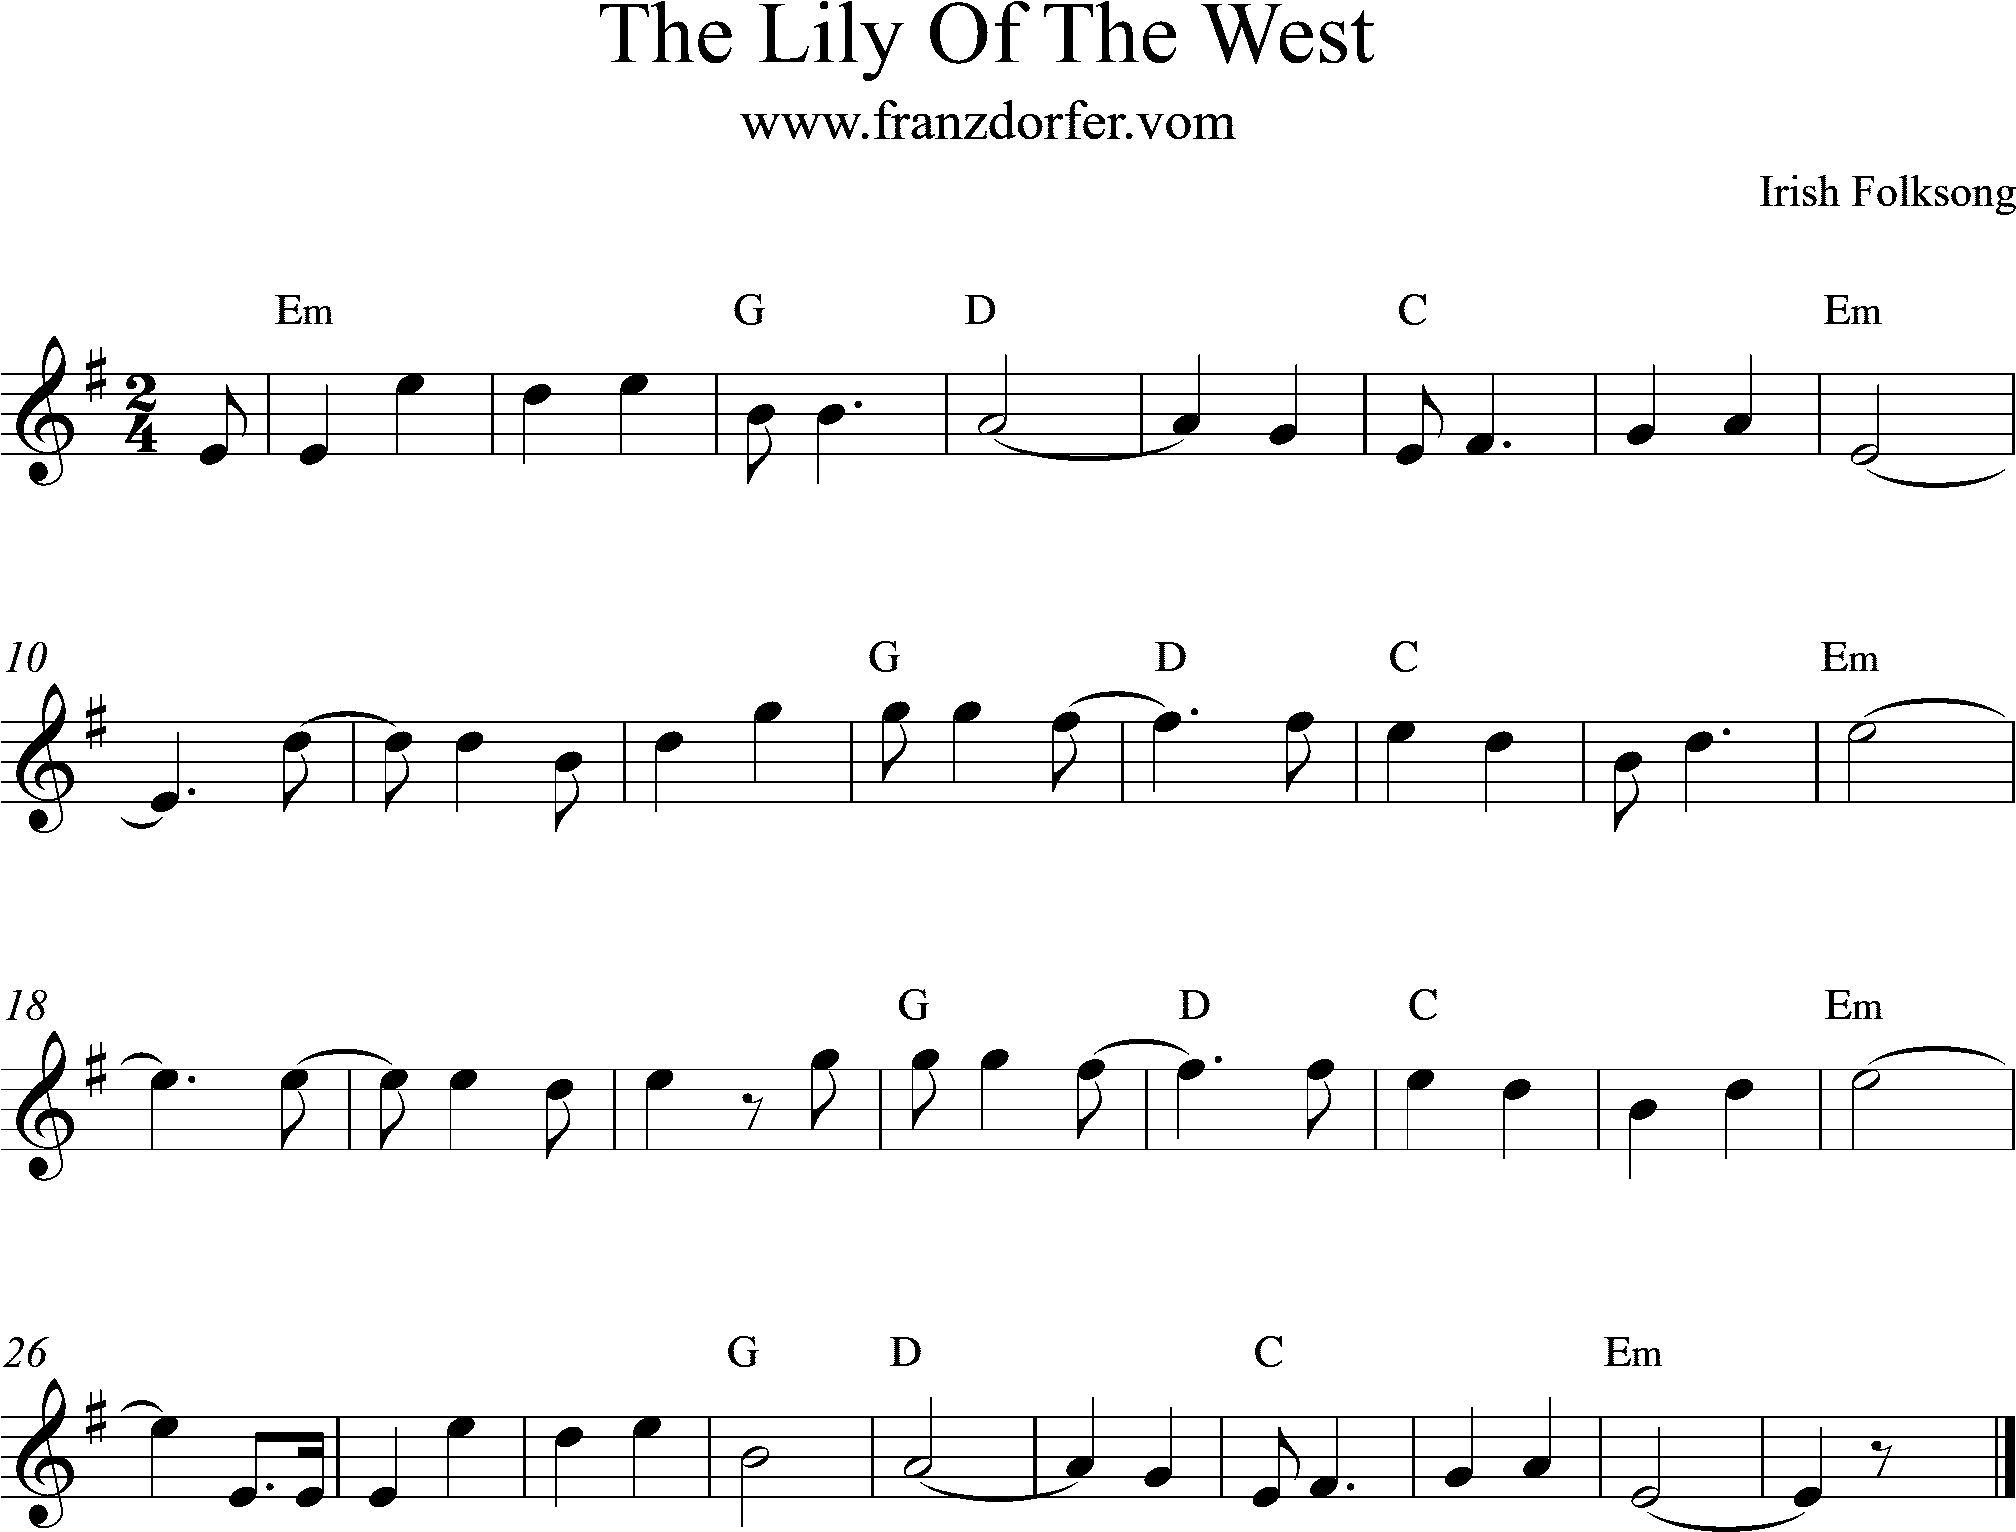 sheetmusic-em, The Lily of the West